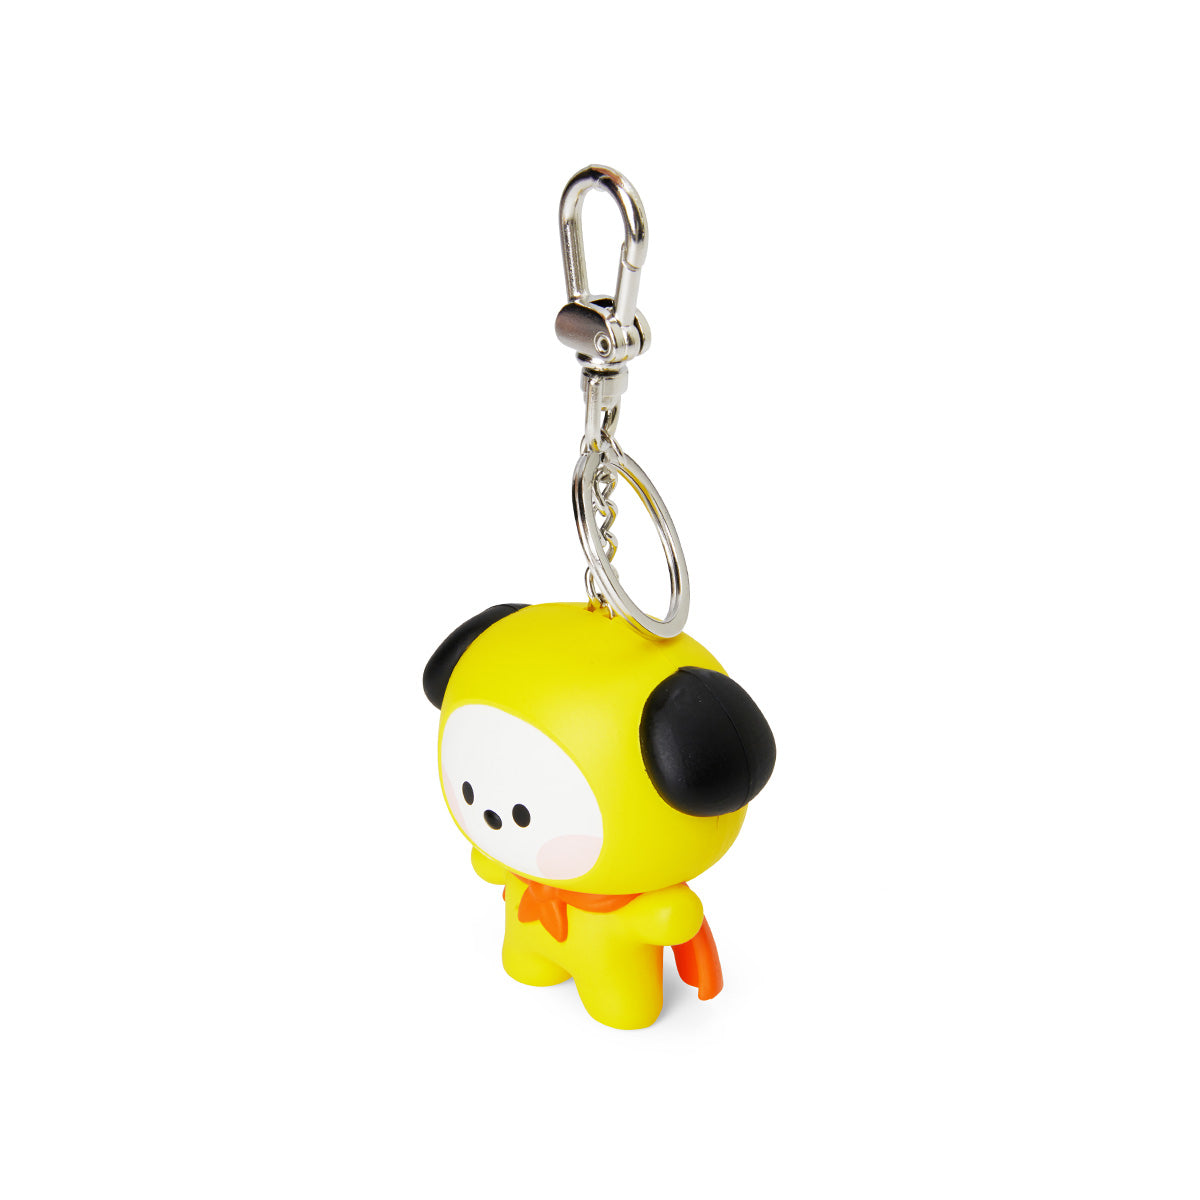 BT21 CHIMMY minini FIGURINE SOUND KEYRING | New products are updated daily.